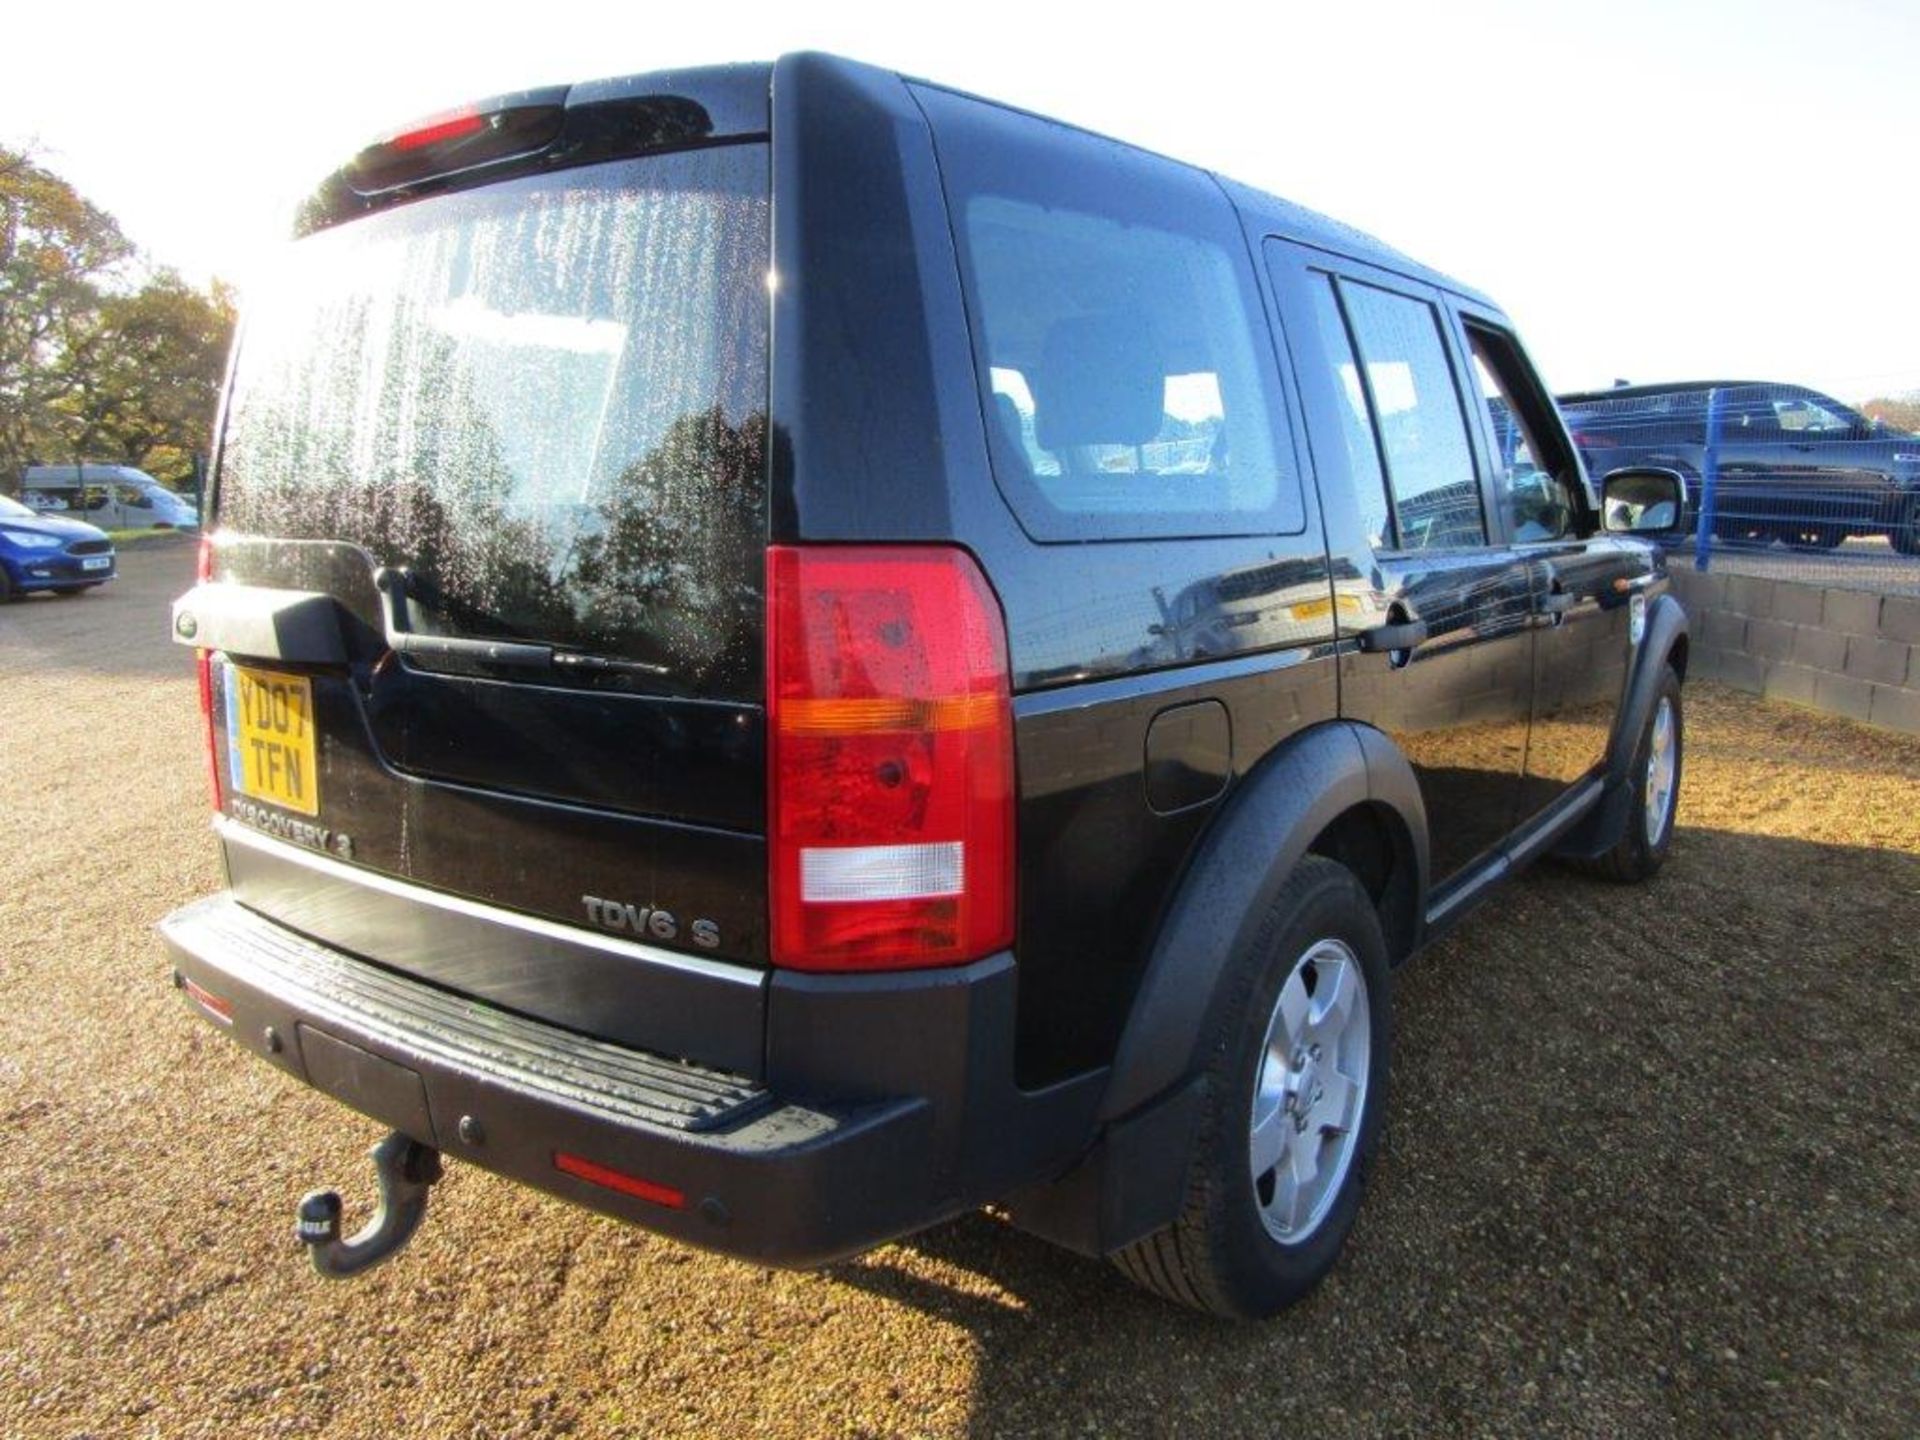 07 07 Land Rover Discovery 3 TDV6 S - Image 18 of 30